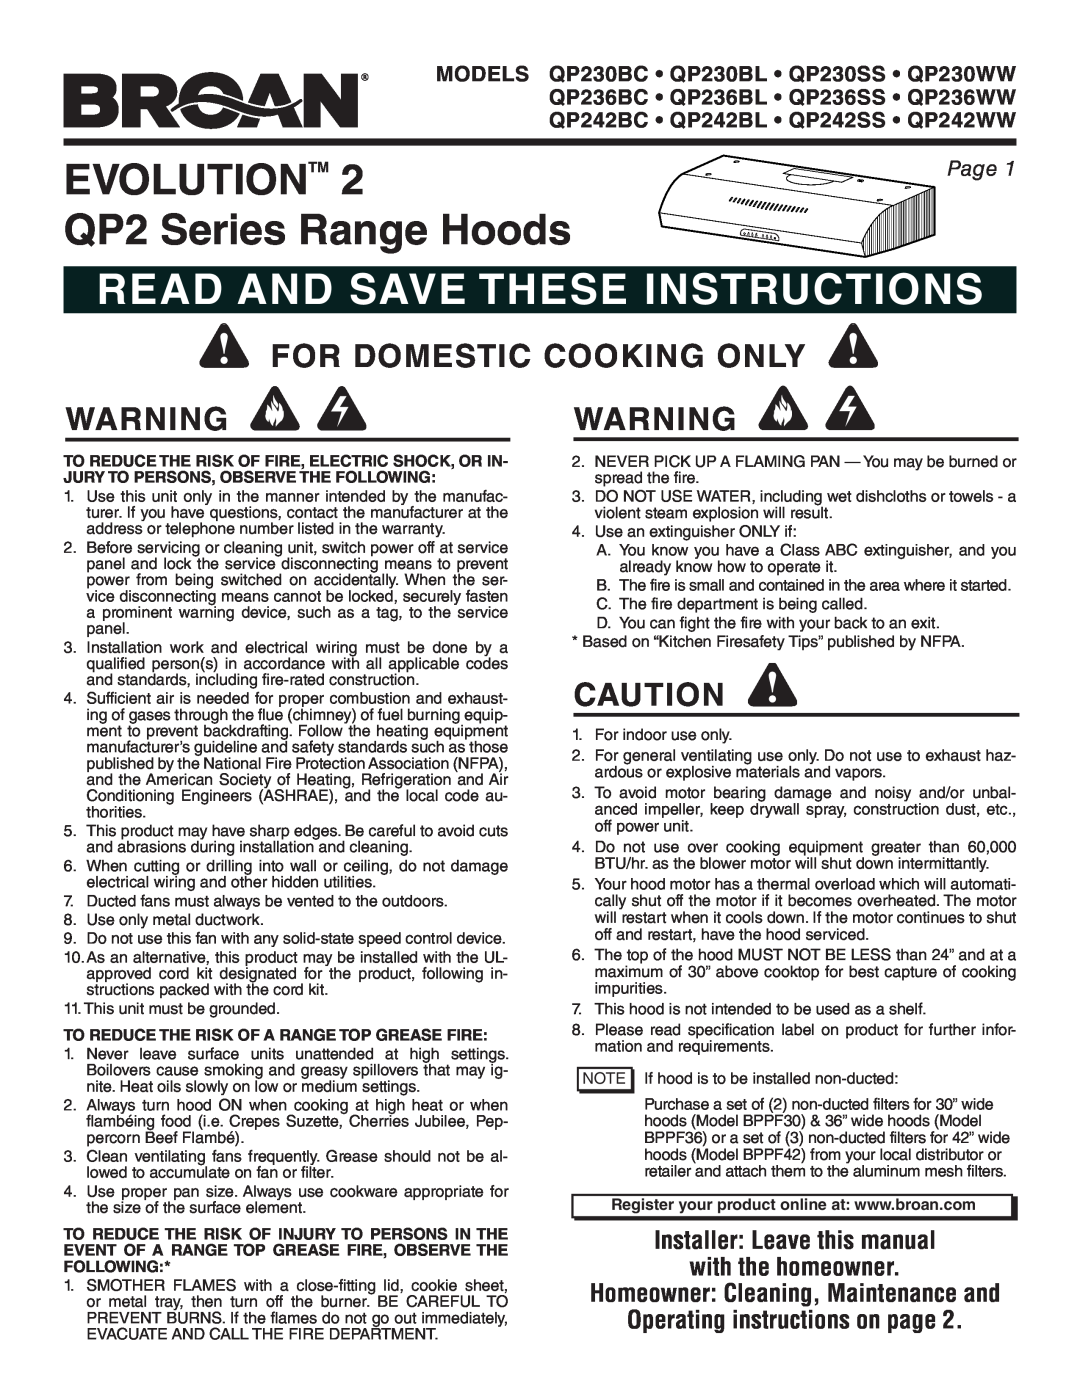 Broan QP242BL warranty Evolution, QP2 Series Range Hoods, Read And Save These Instructions, For Domestic Cooking Only 